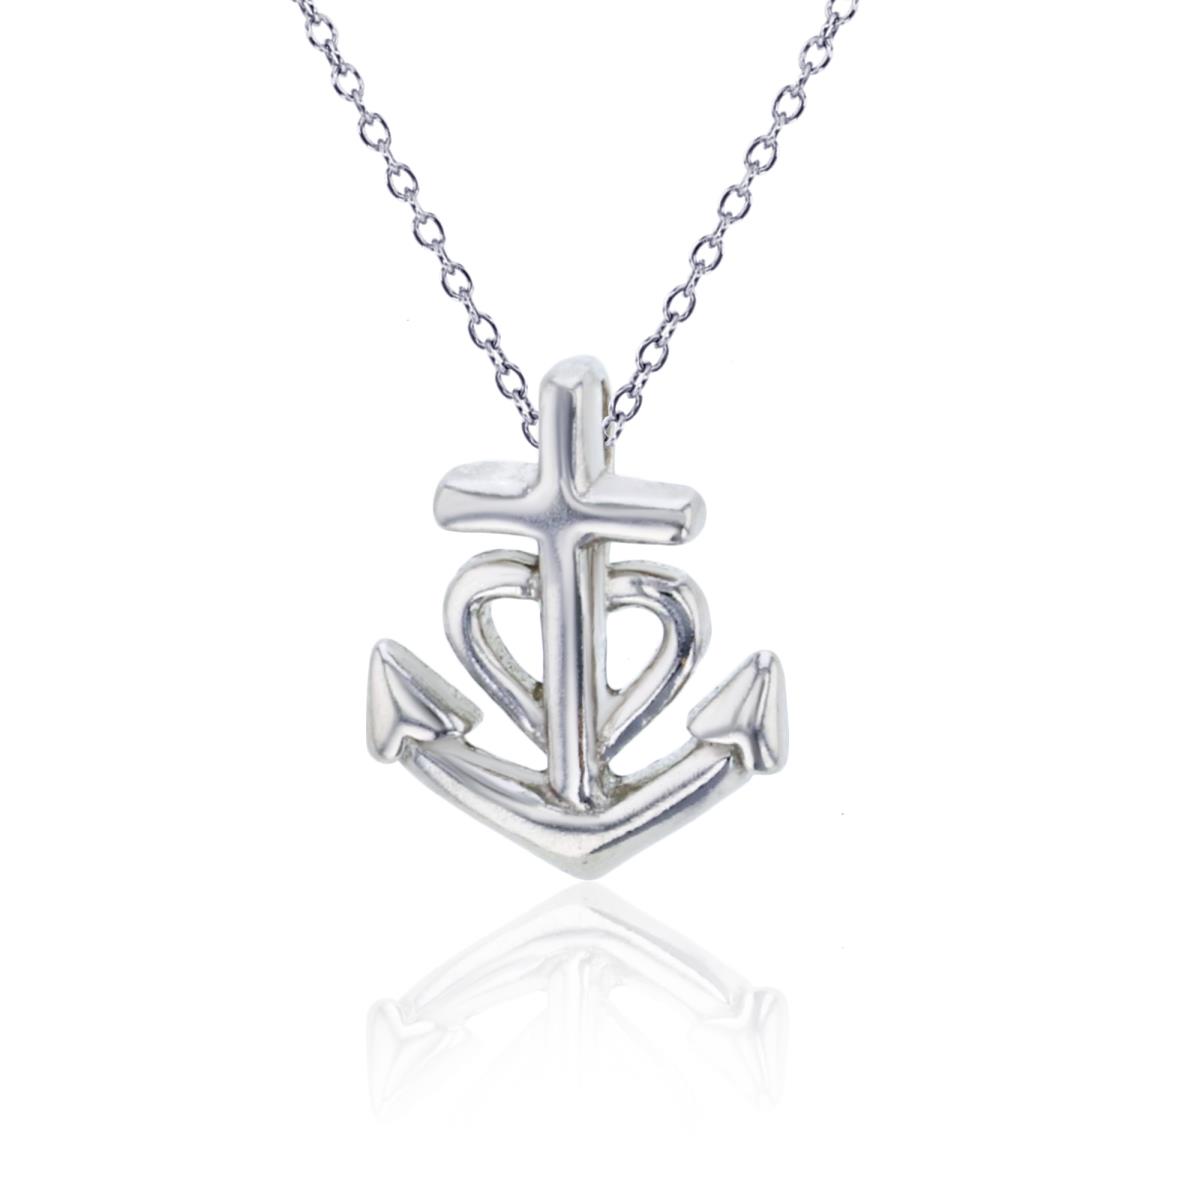 Sterling Silver Rhodium Nautical Cross/Heart 18"Necklace